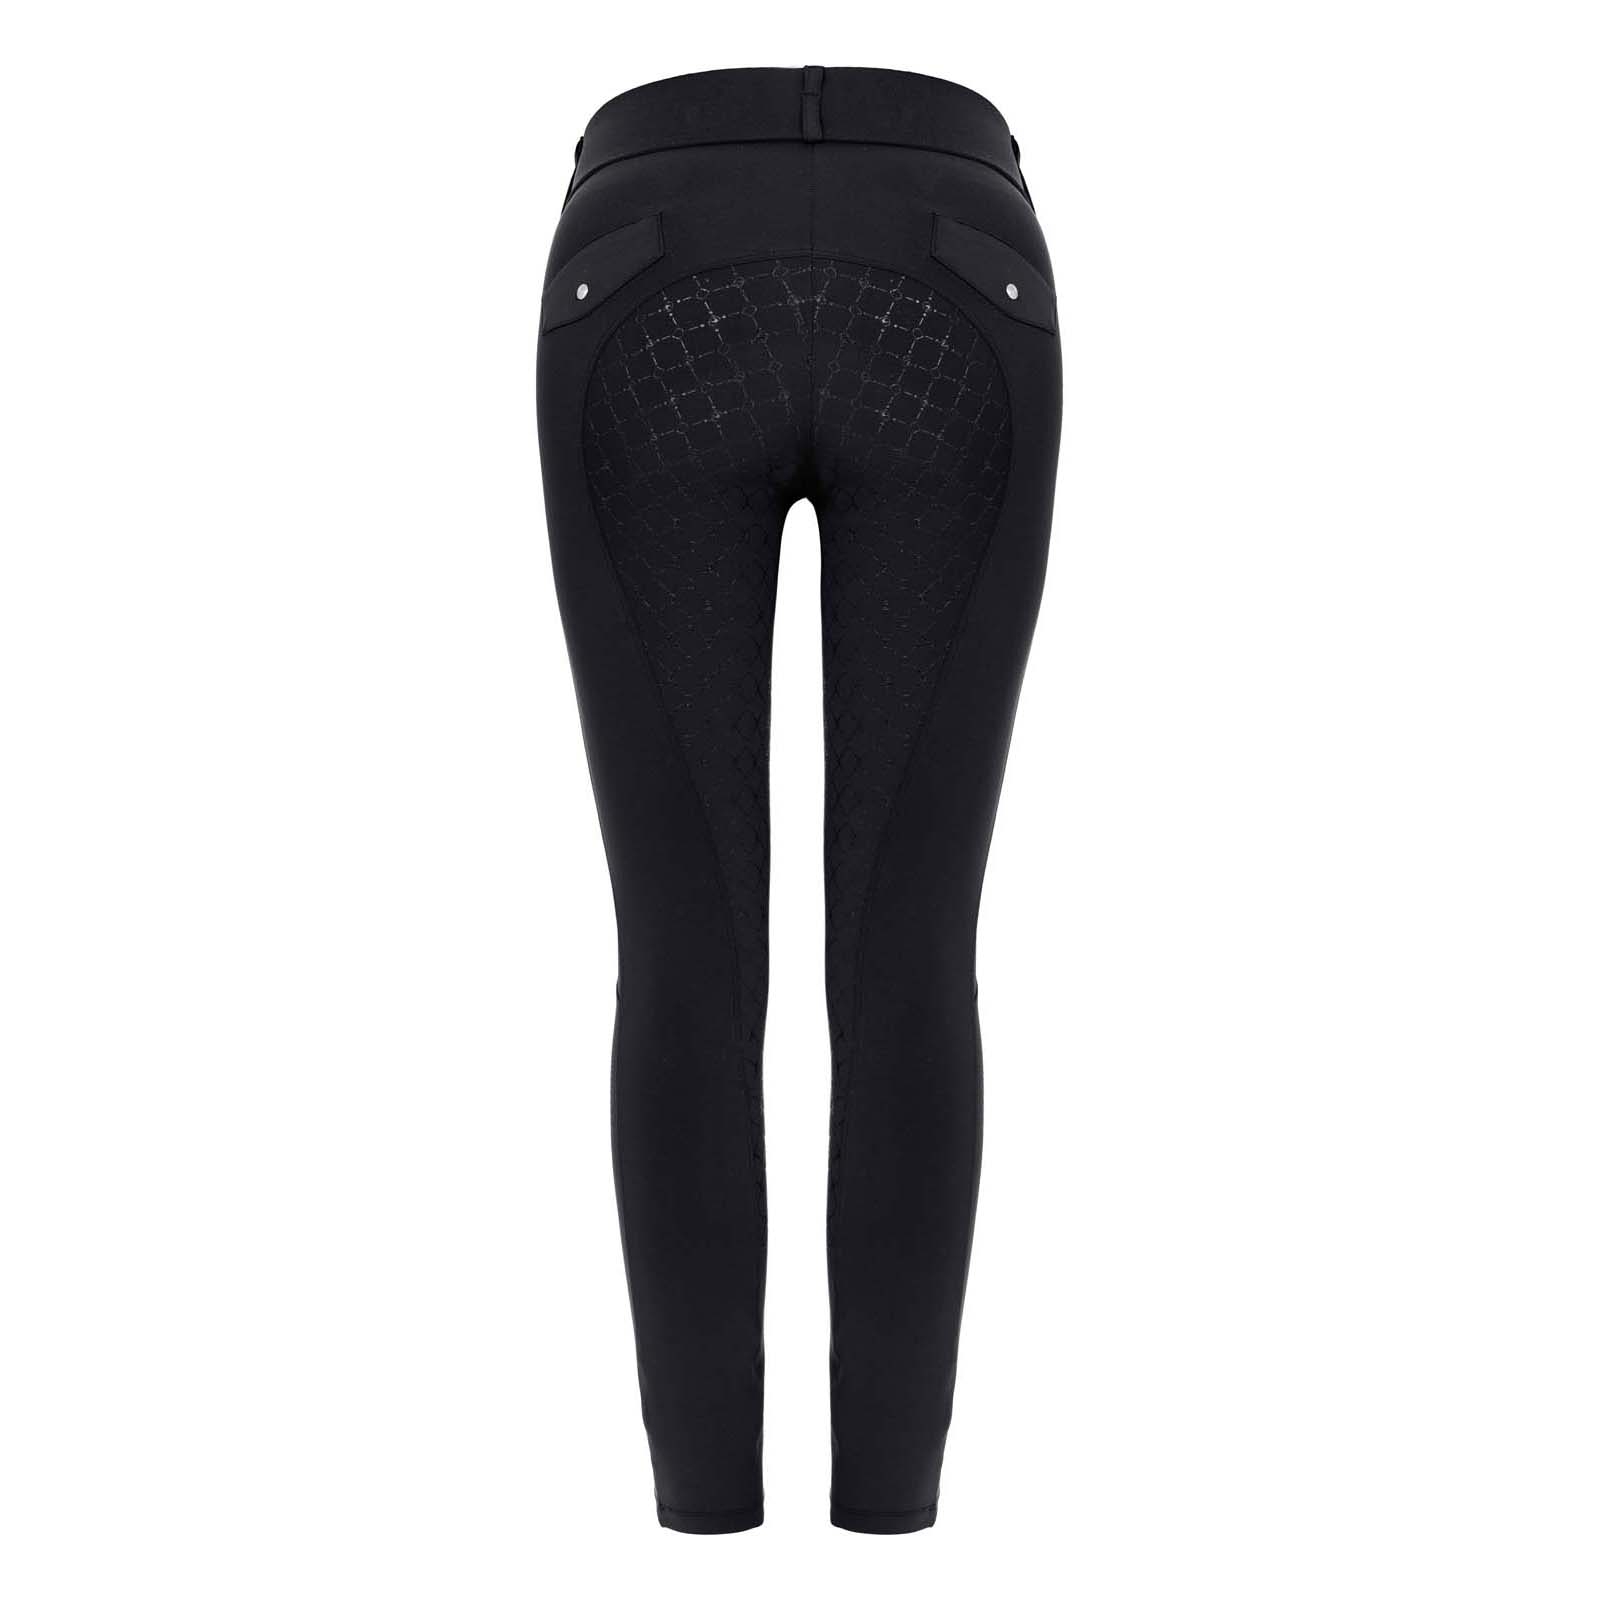 Legacy Ladies Riding Tights - Black & Candy Floss